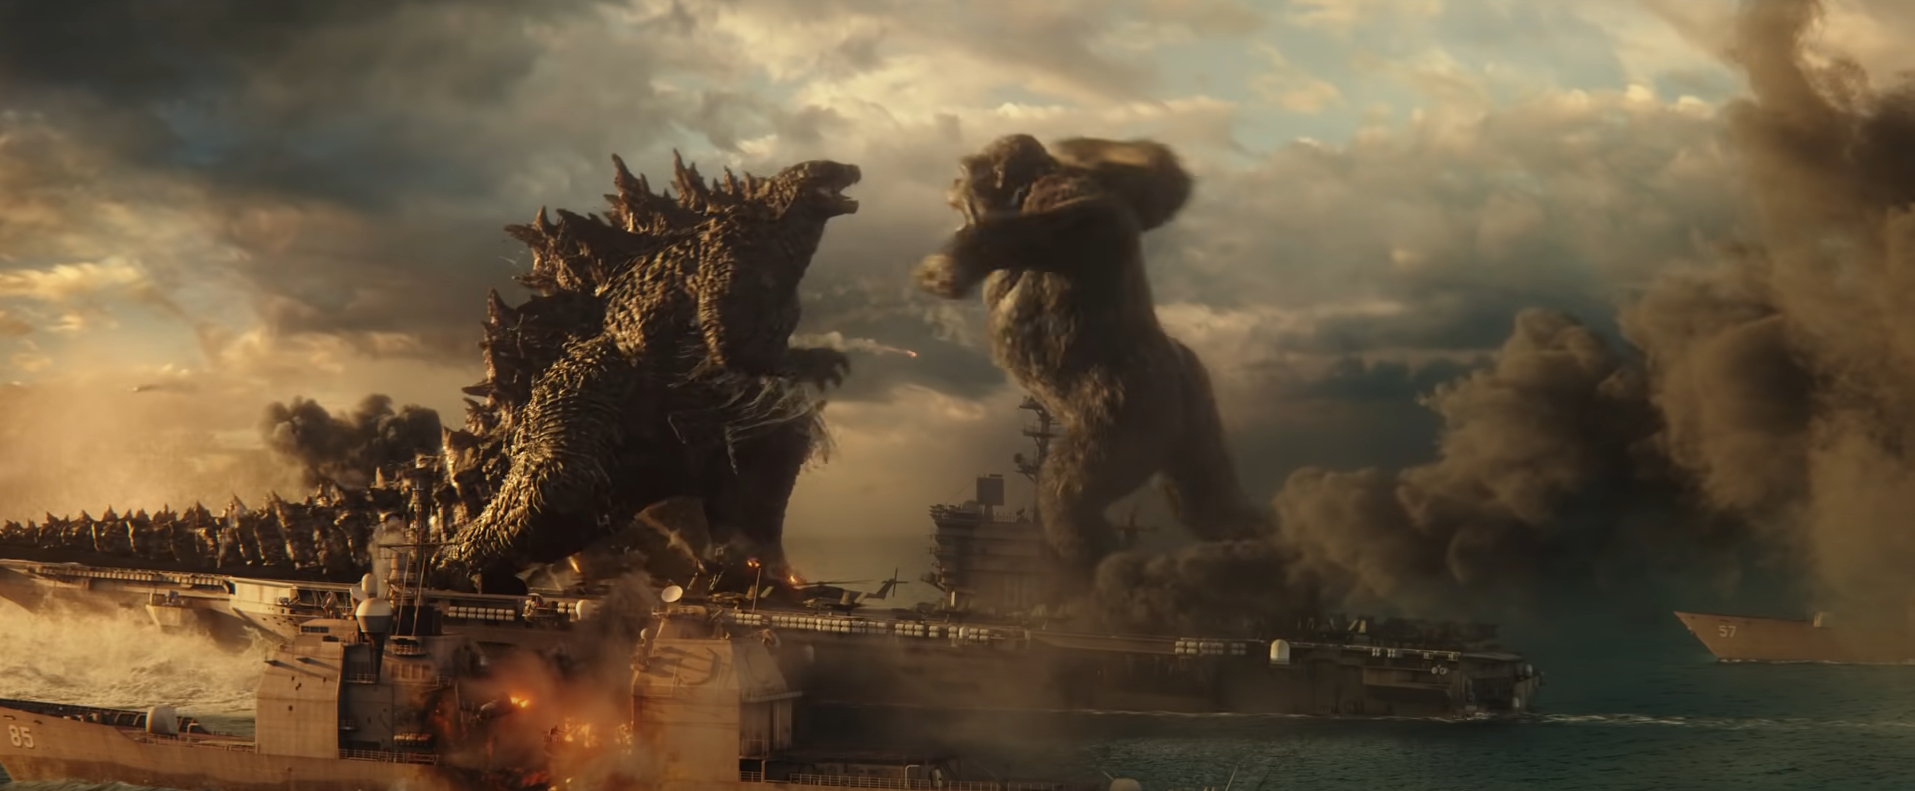 Godzilla and Kong face off on the back of an aircraft carrier. Kong is about to punch Godzilla in the face.